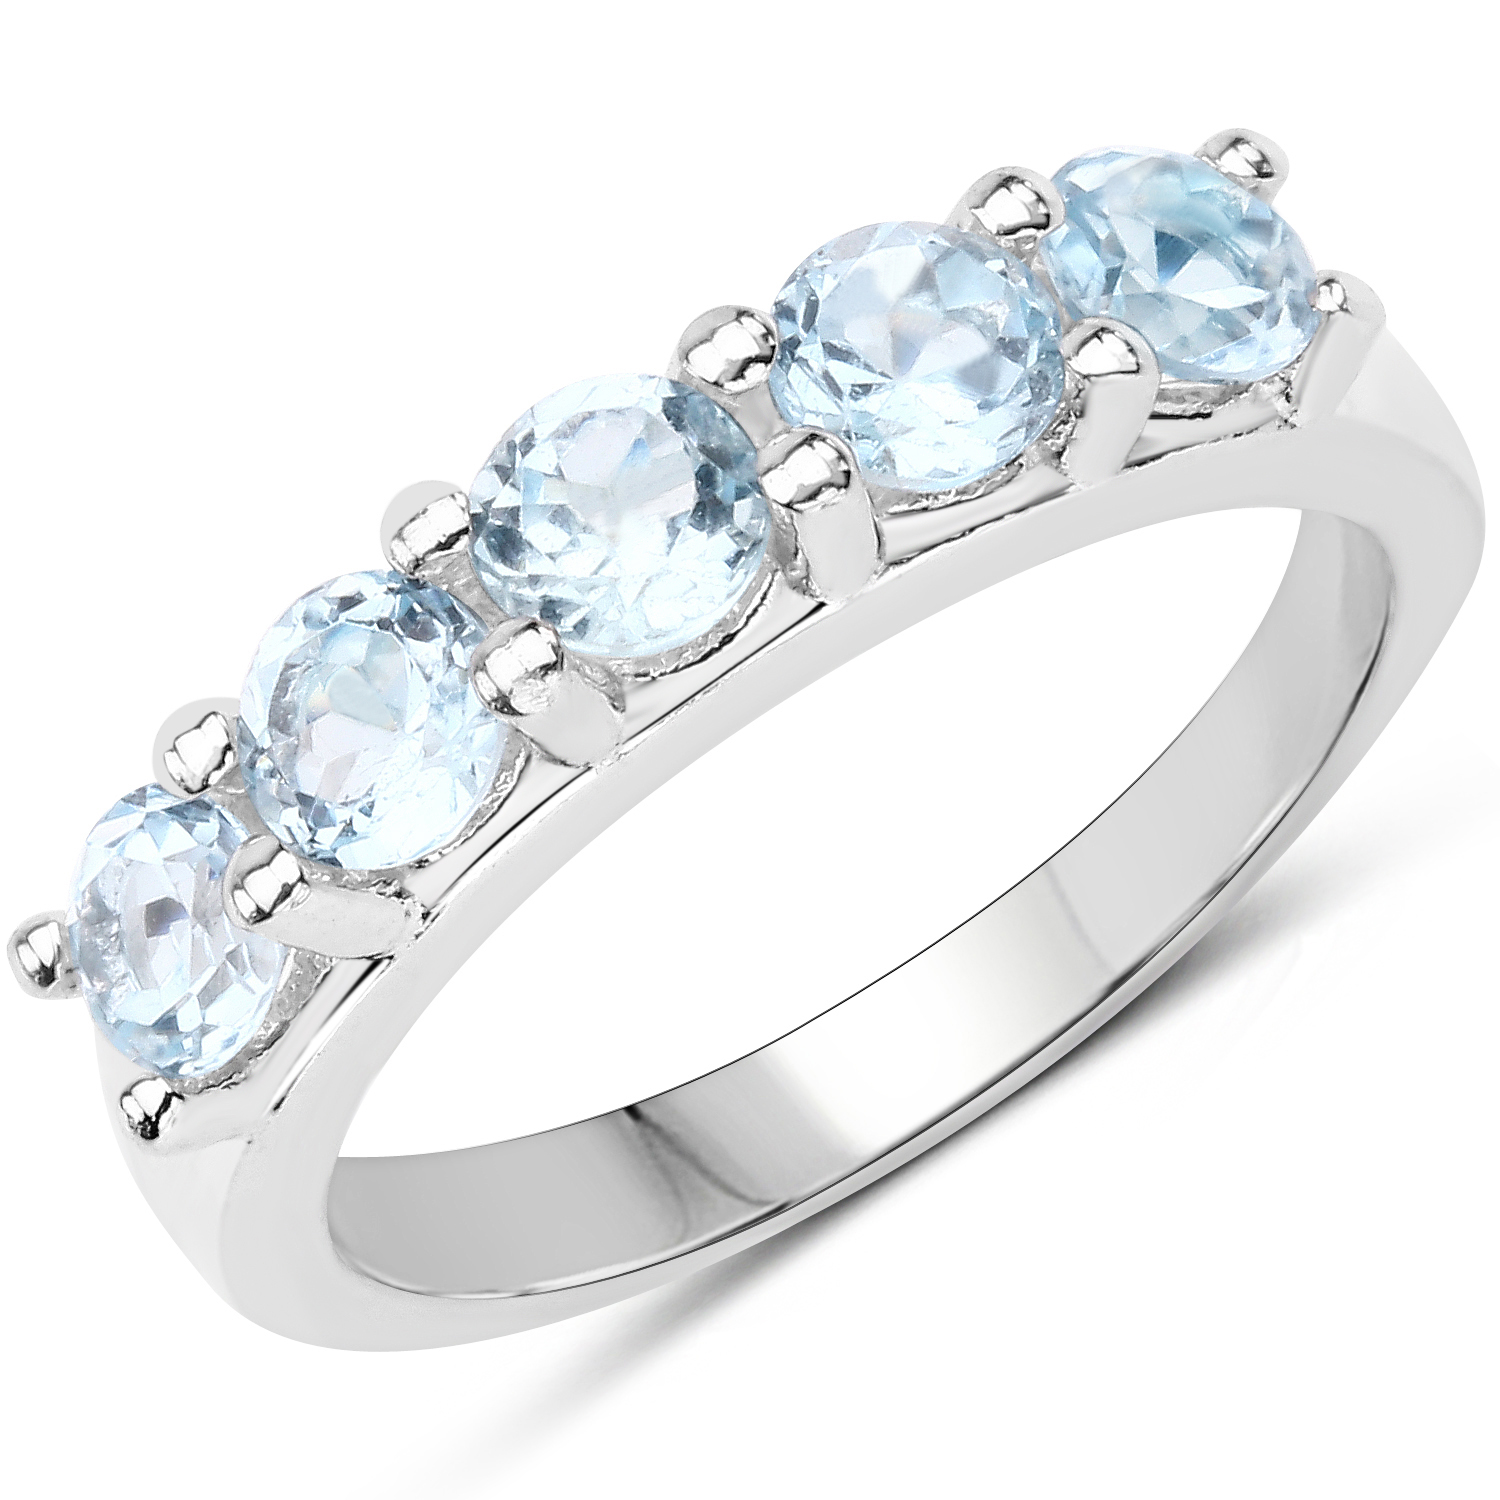 1.60 ct Round Cut Created Blue Topaz & White CZ Wedding Band Engagement Bridal Ring Set 925 Sterling Silver Plated 